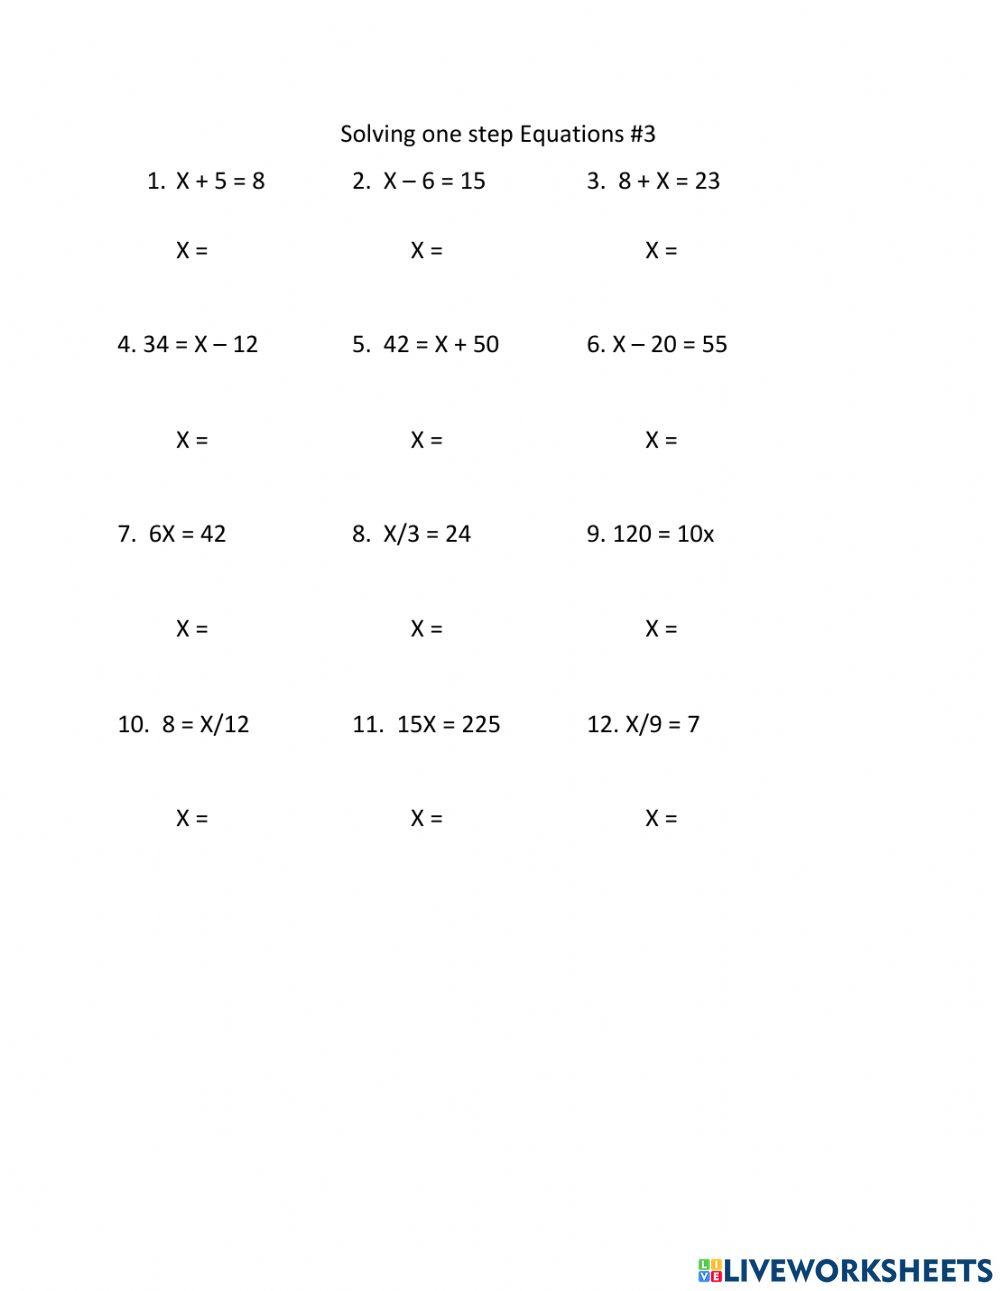 Solve one step equations -3